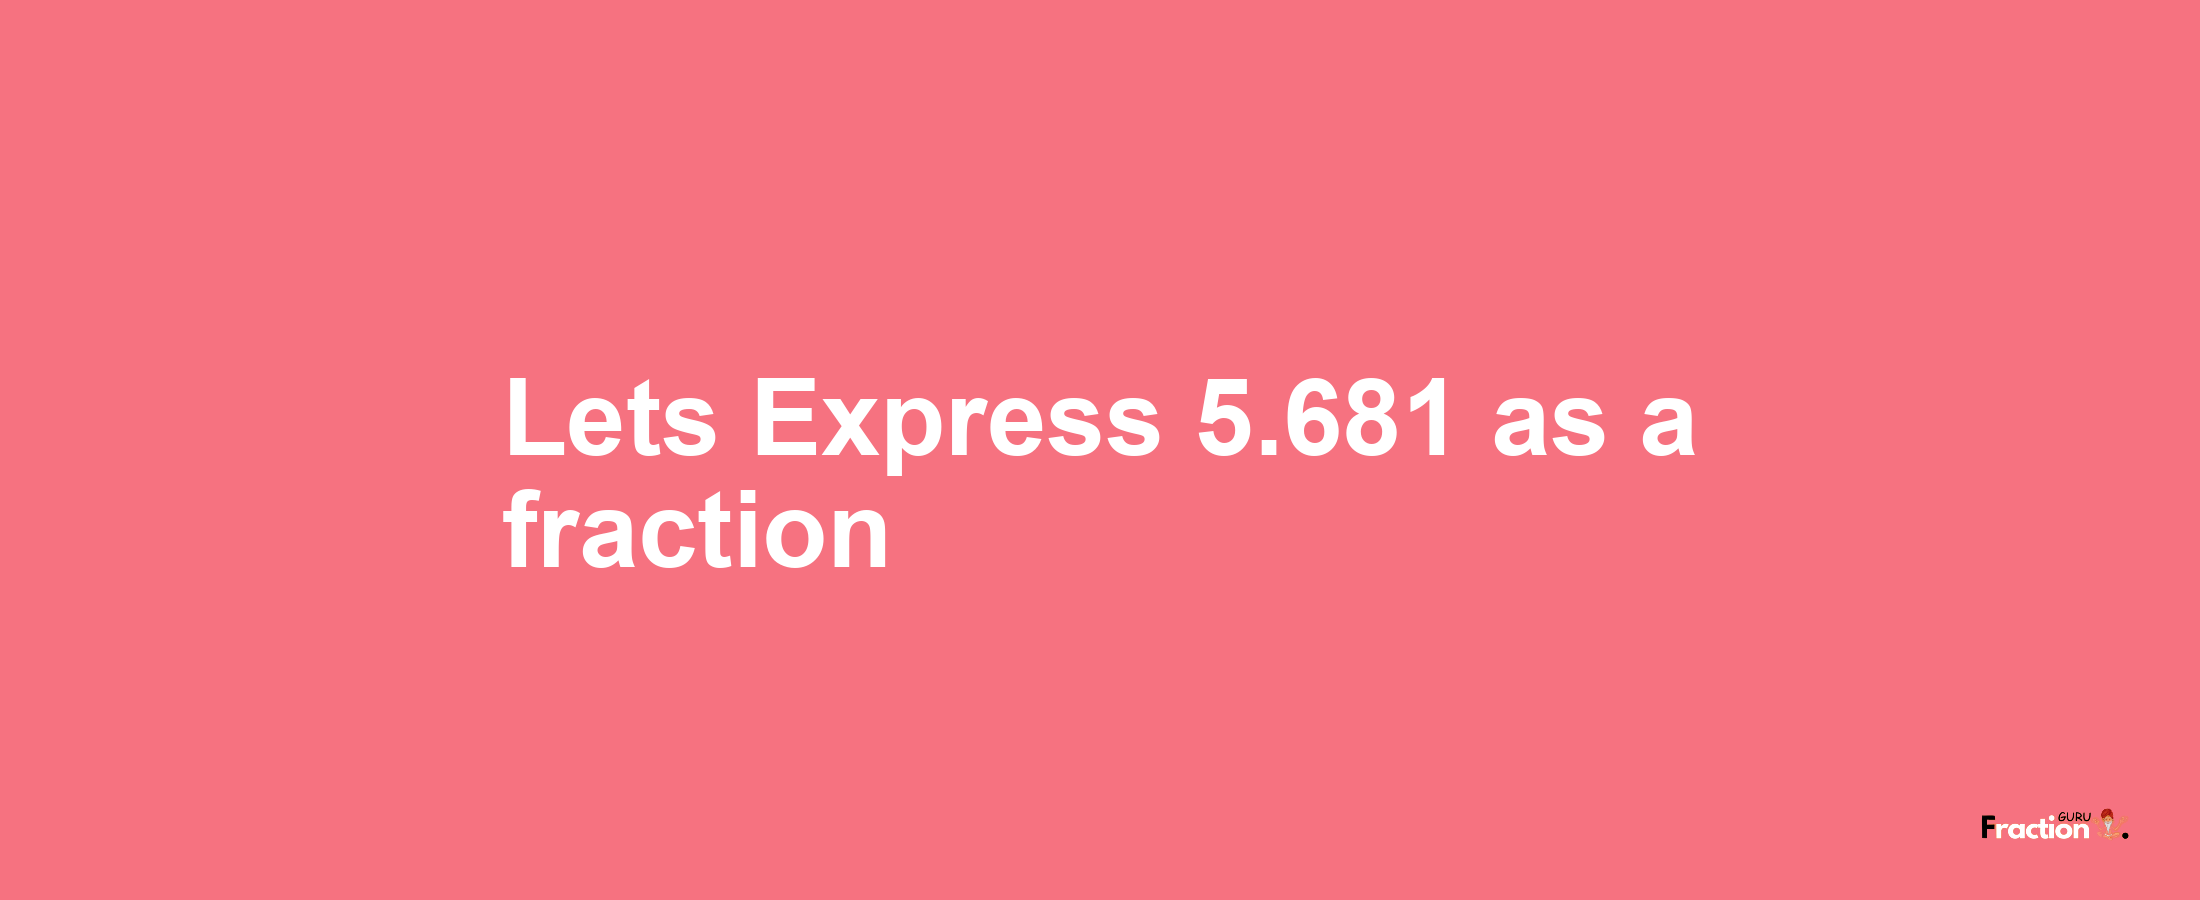 Lets Express 5.681 as afraction